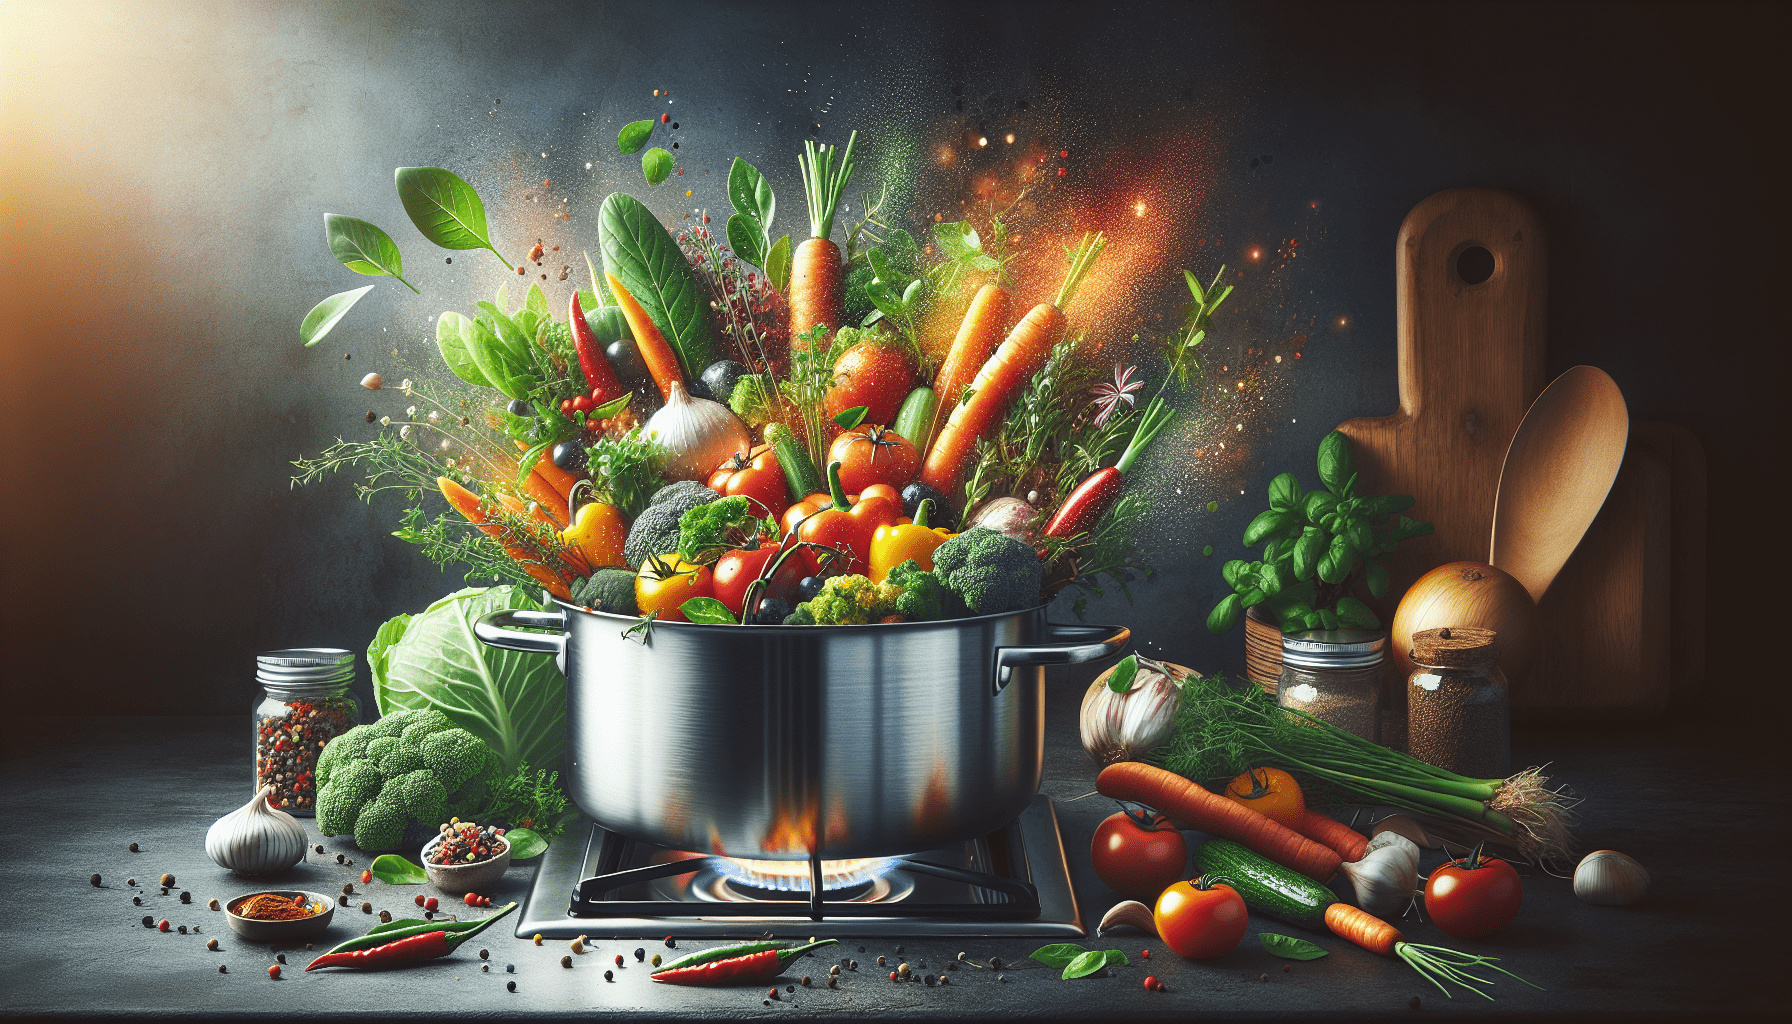 What Is The Safest Cookware For Your Health?